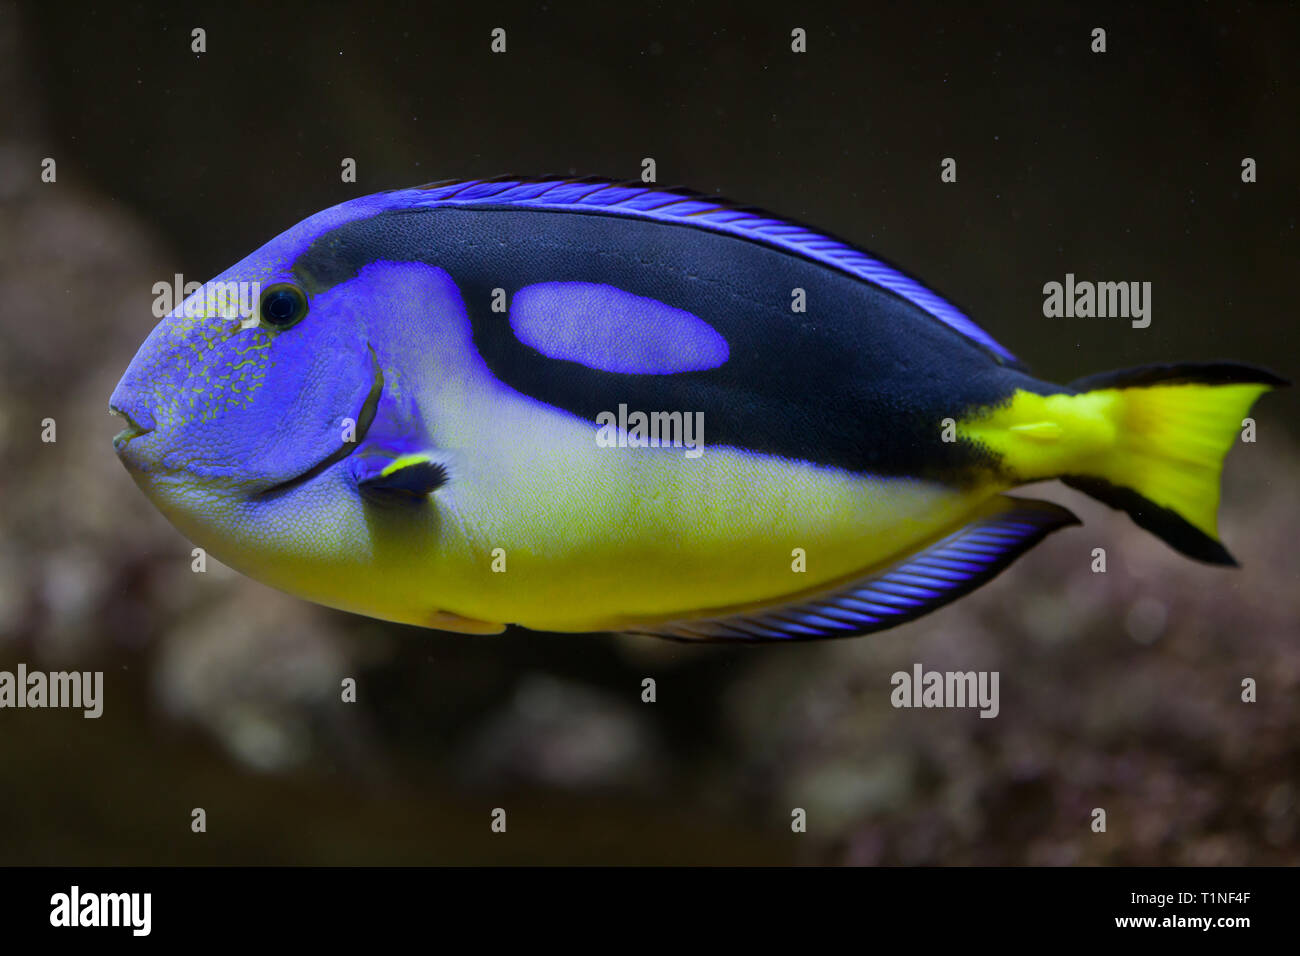 Blue surgeonfish (Paracanthurus hepatus), also known as the blue tang. Stock Photo